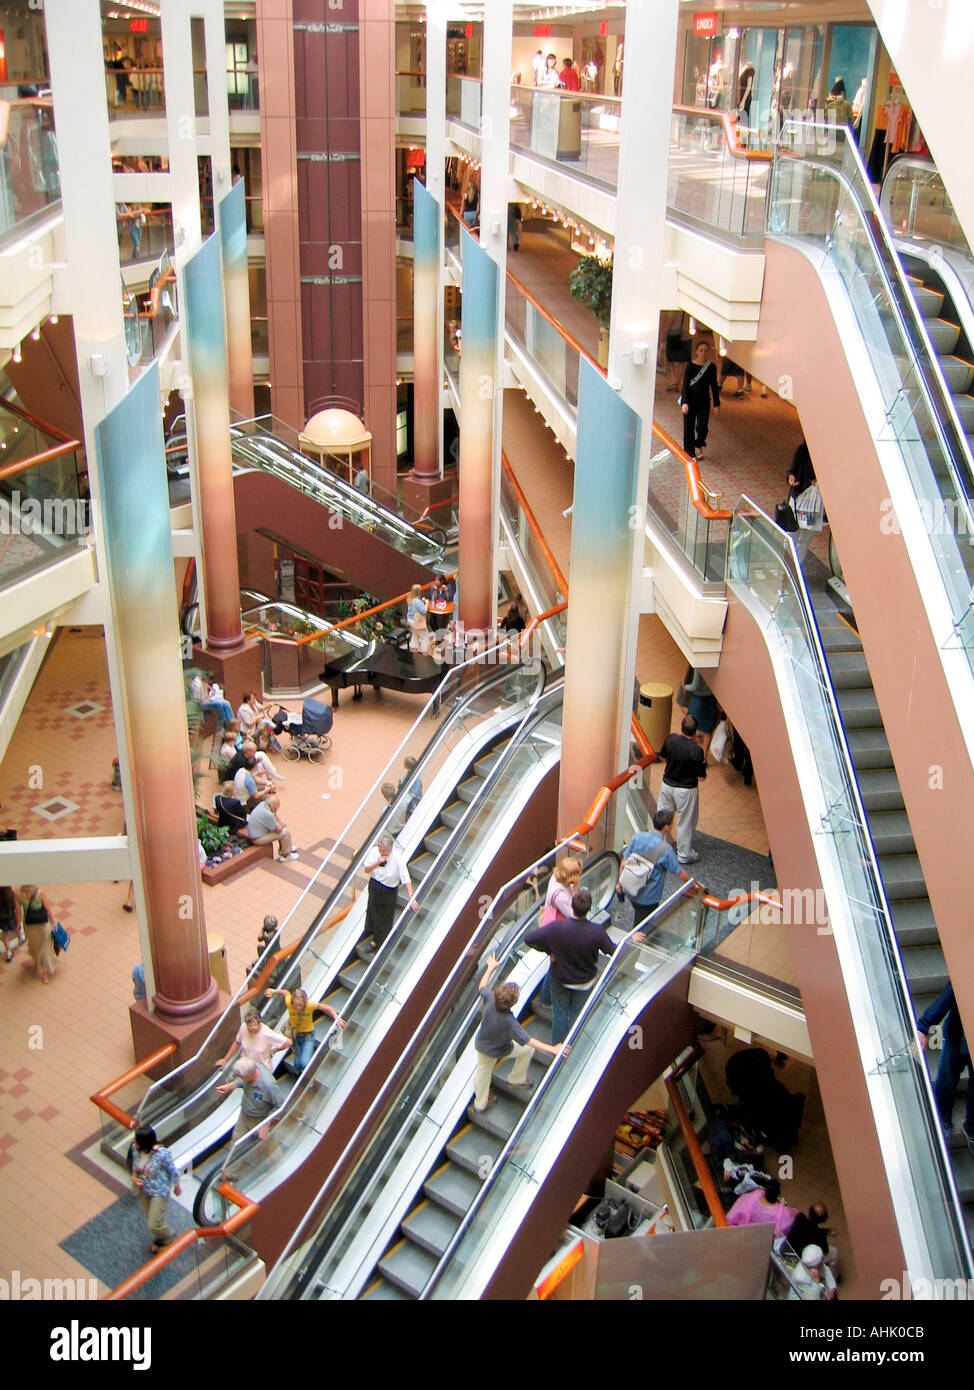 Galleriet shopping mall in central Bergen Norway Stock Photo - Alamy